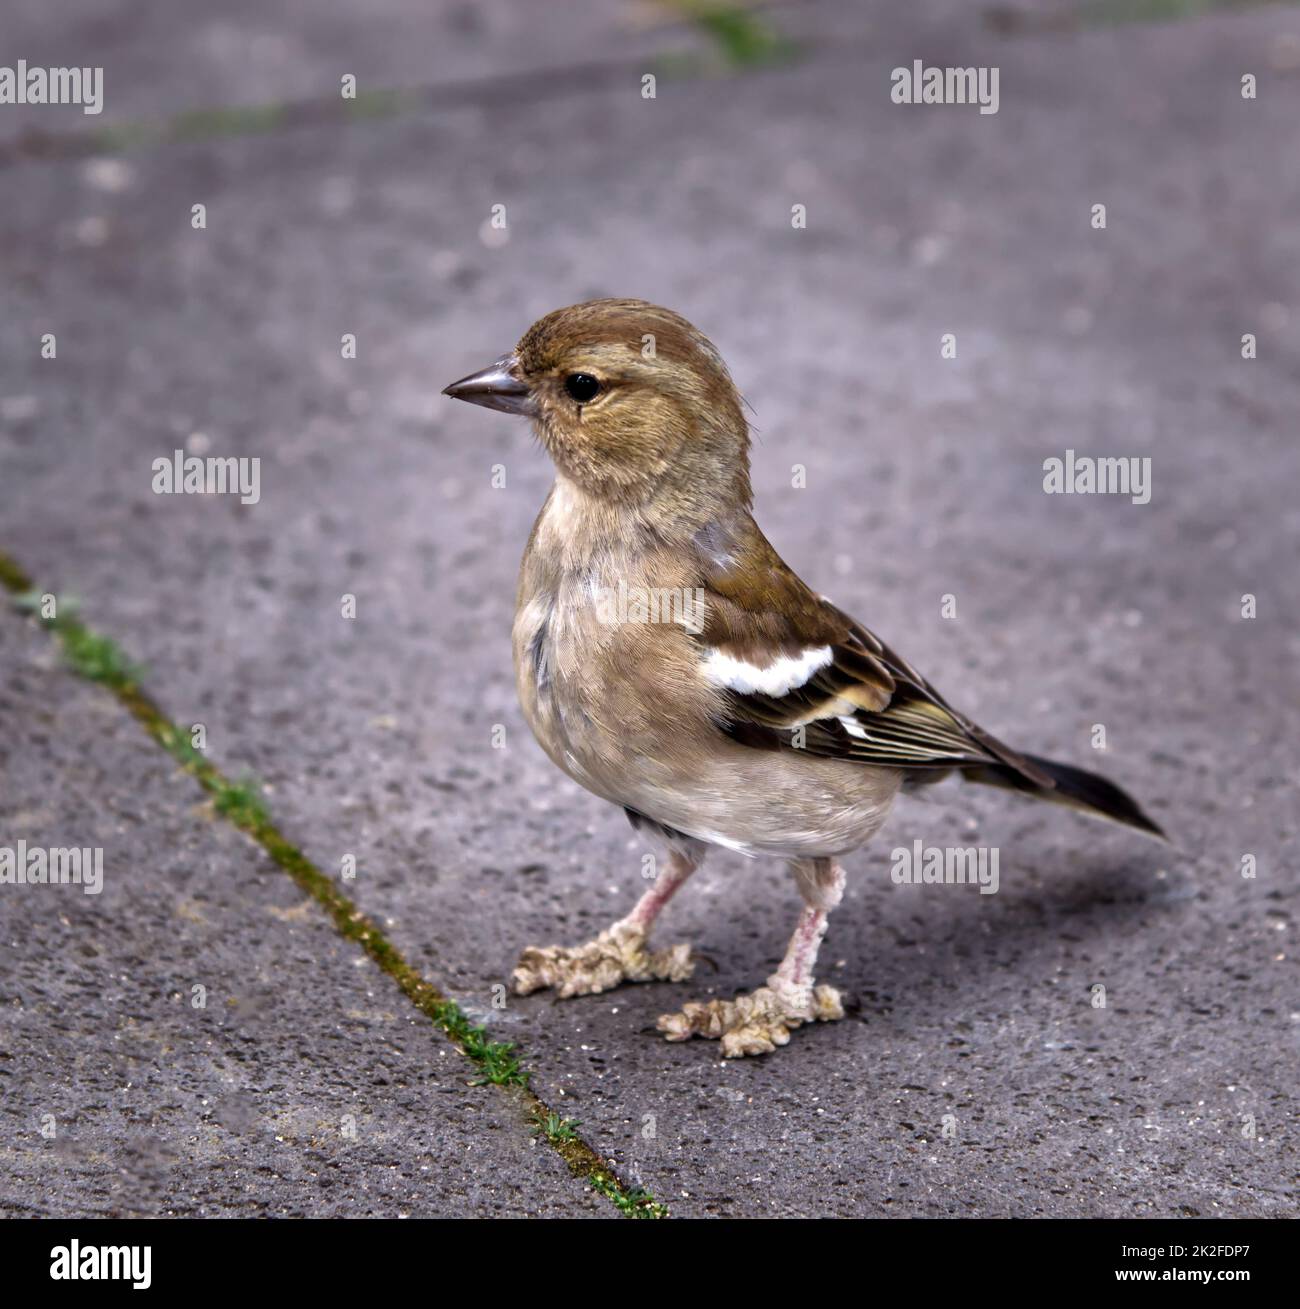 Closeup view: pitiable chaffinch with skin infection an limitations Stock Photo